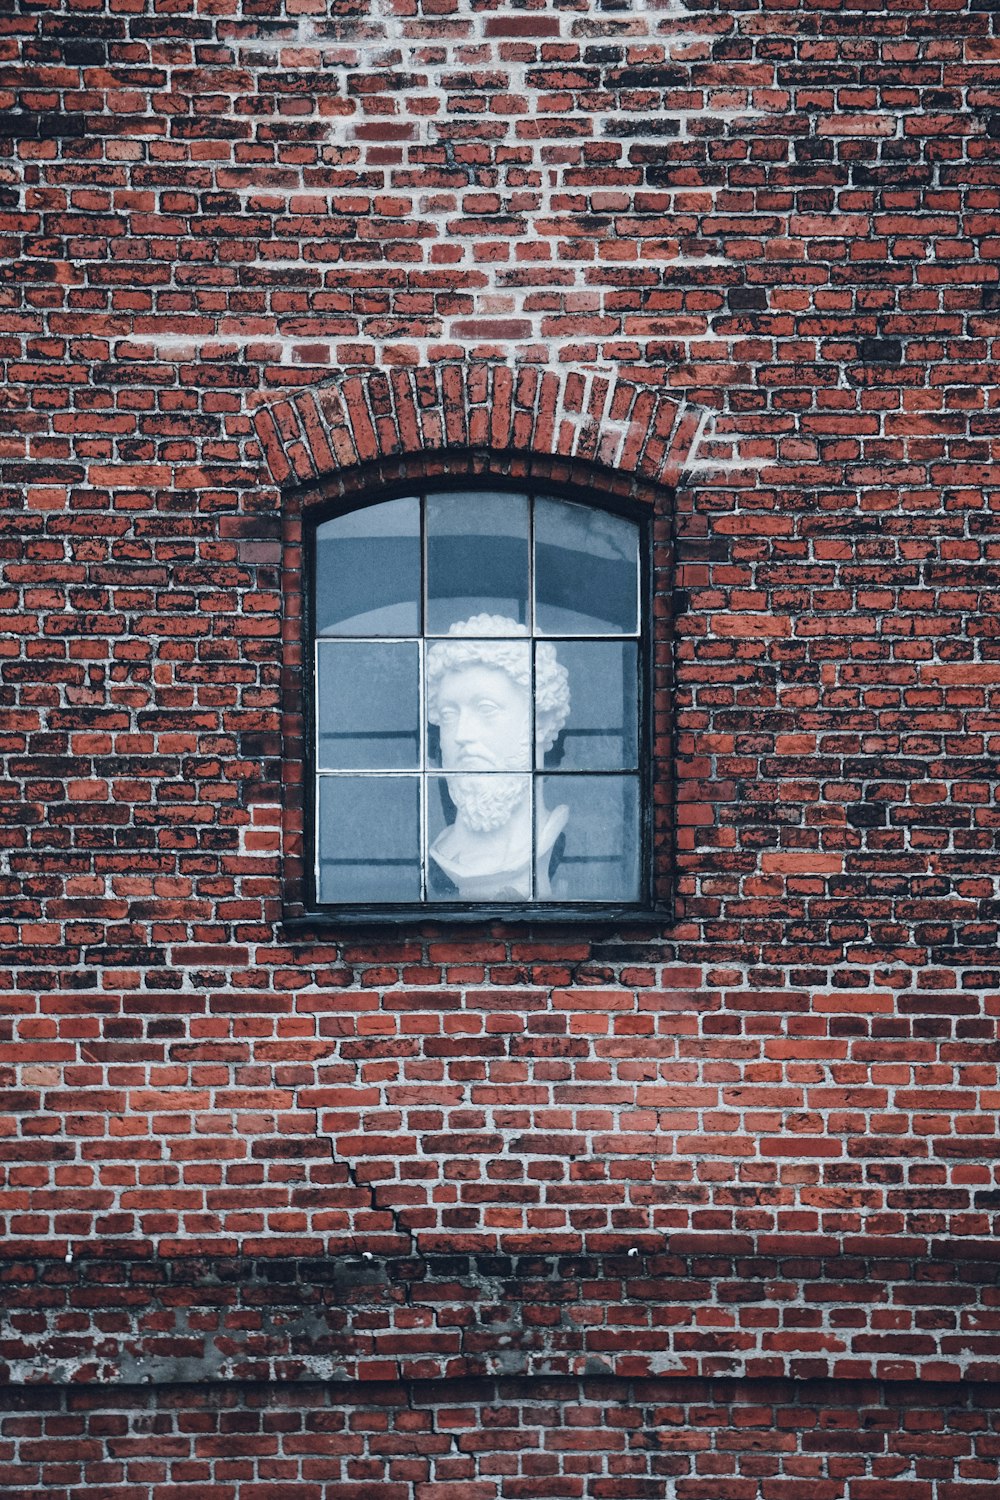 a brick building with a window and a statue in the window